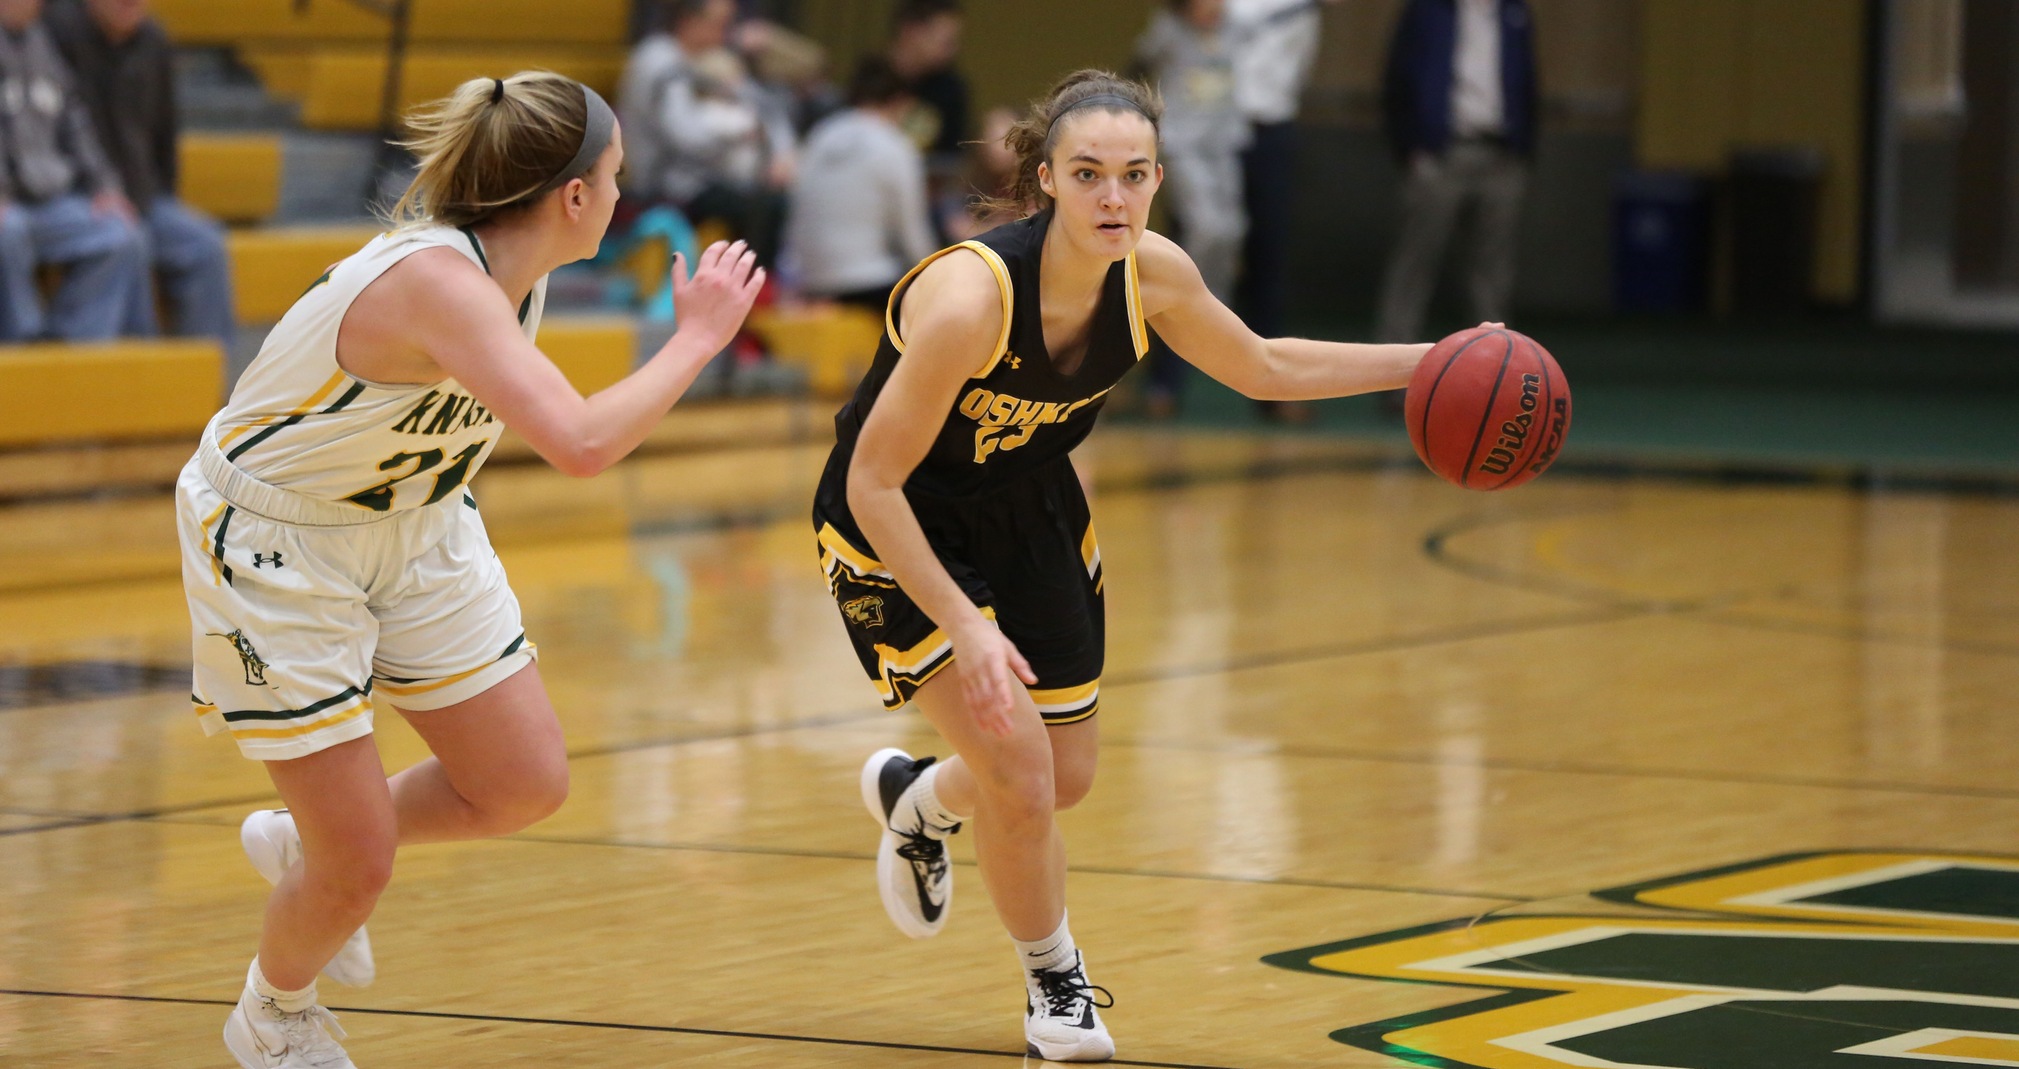 Emily Higgins had a career-high eight points with three rebounds against the Loggers.